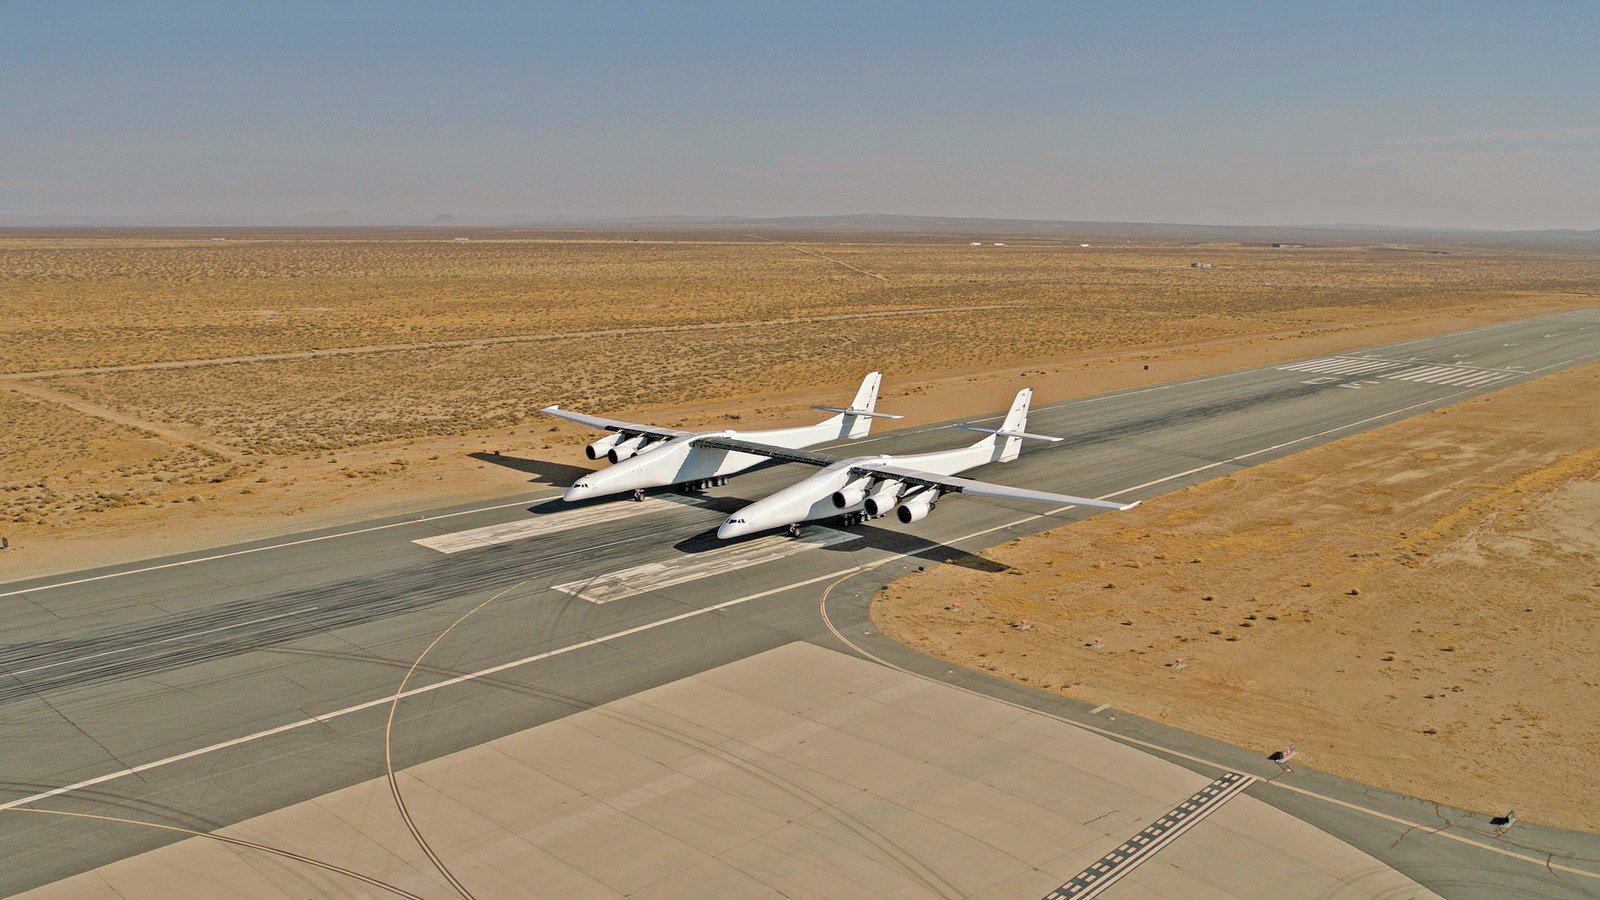 Stratolaunch aircraft